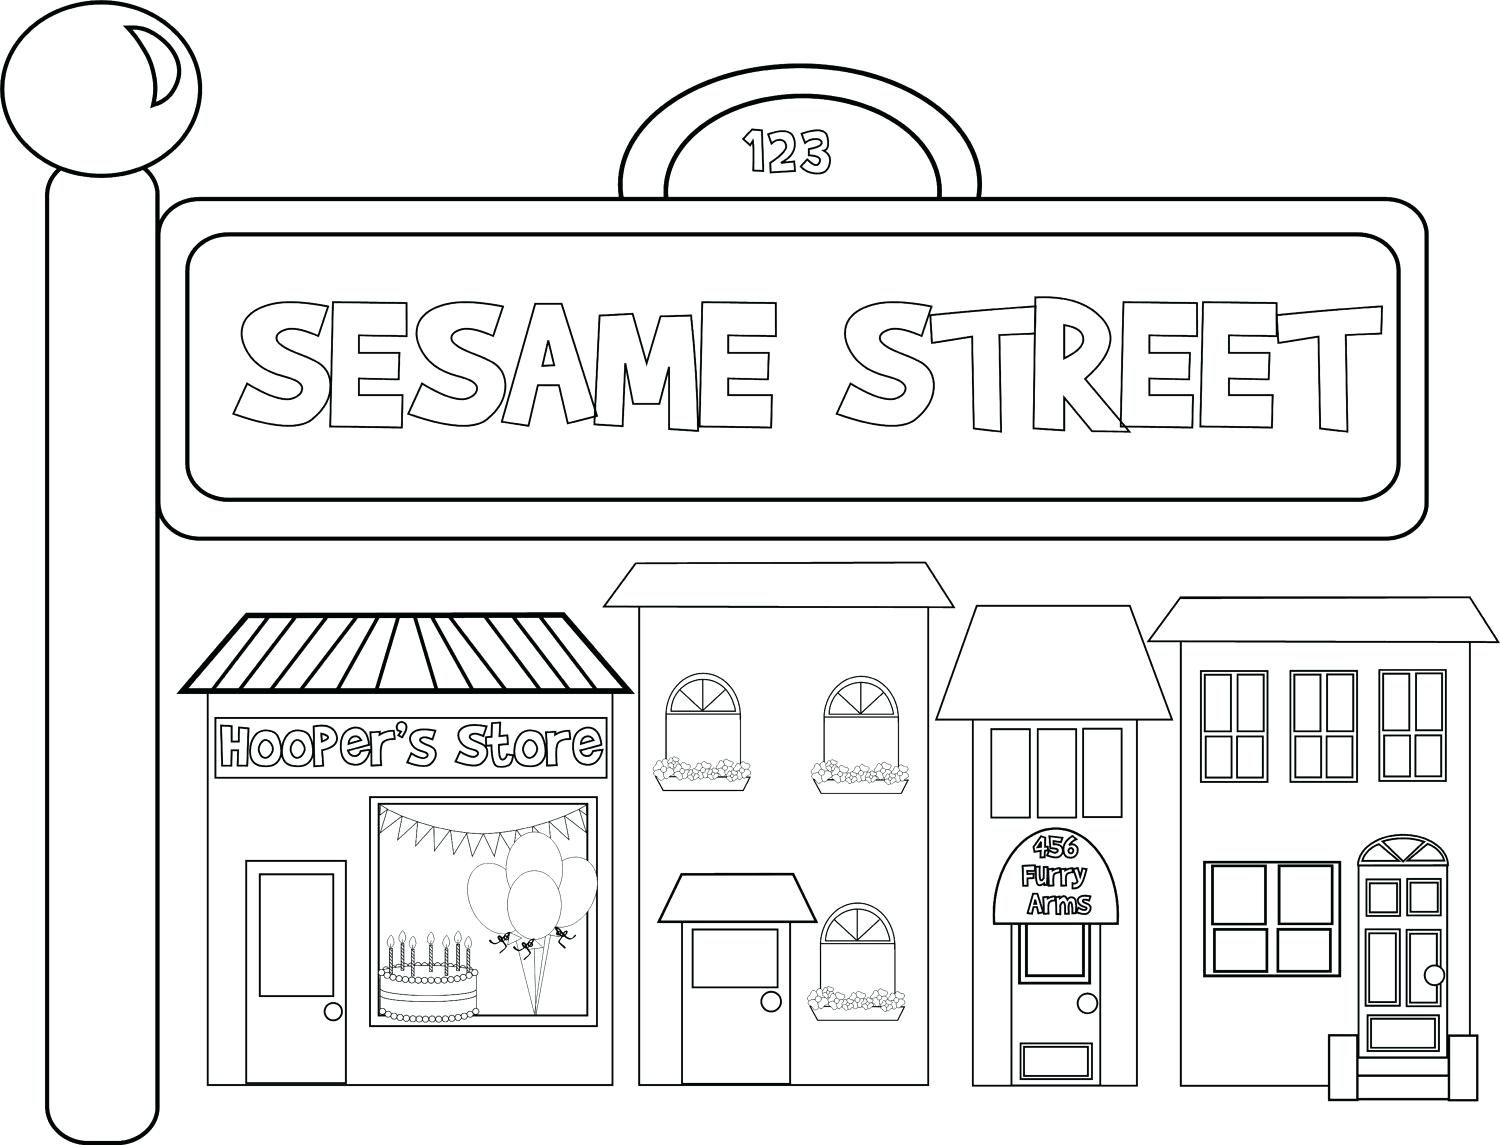 Sesame Street Sign Coloring Page Coloring Pages Road Sign Coloringes Street Traffic Signal Sheet